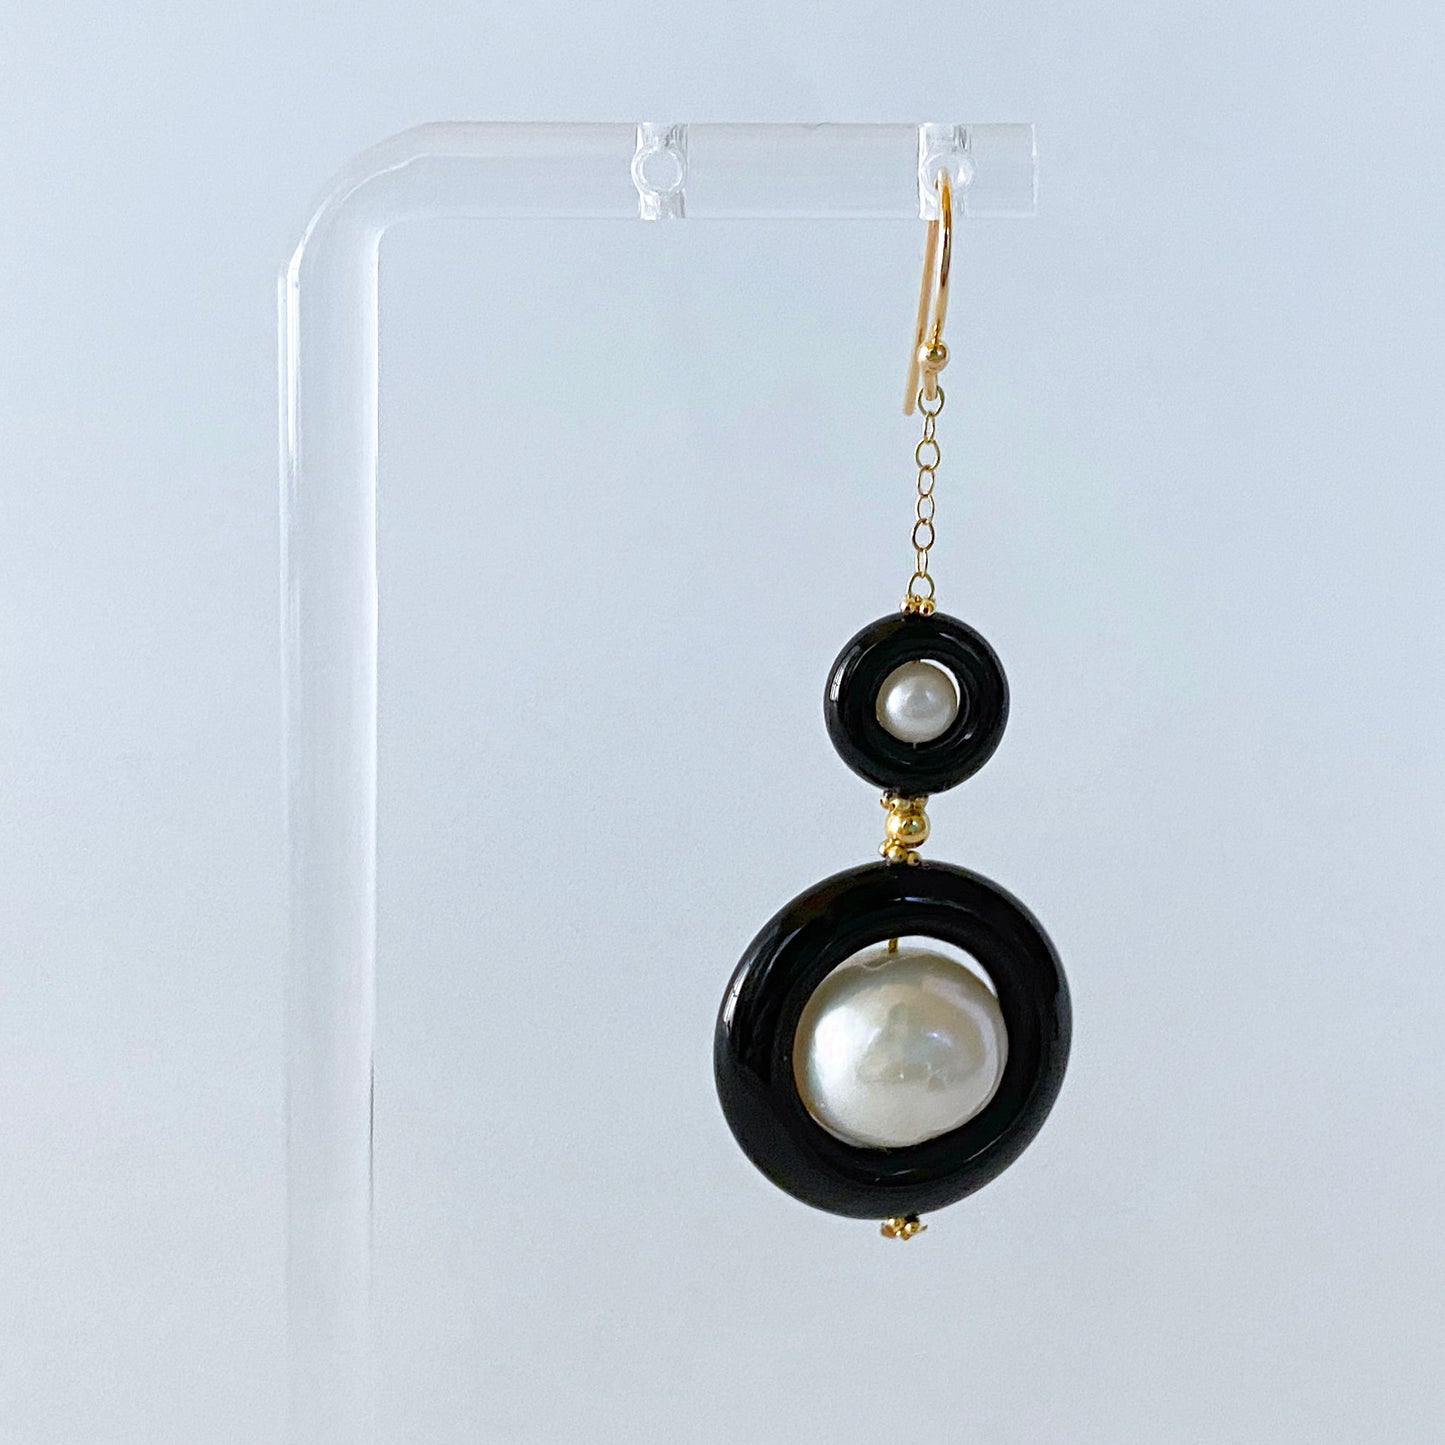 2 Tier Pearl, Black Onyx and Solid 14k Yellow Gold Earrings